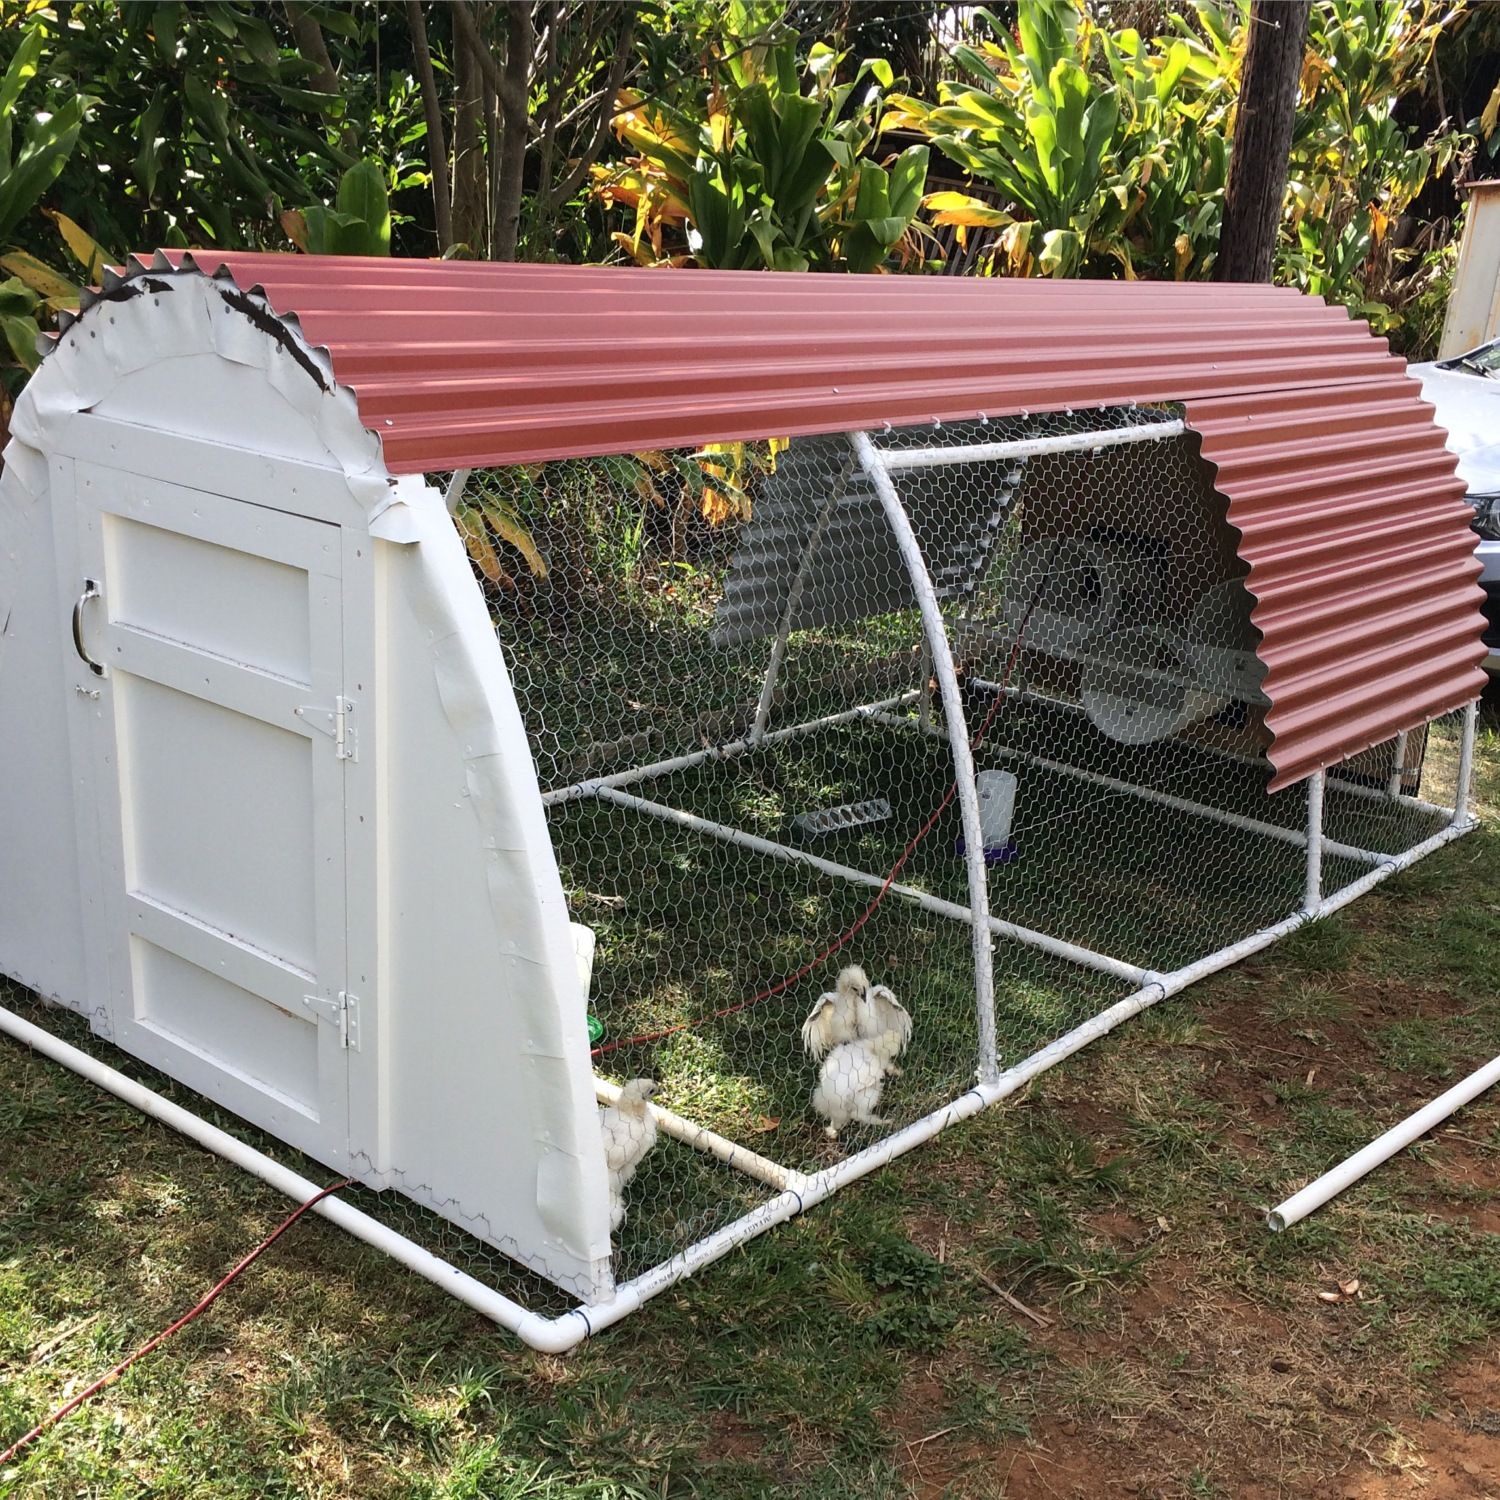 DIY PVC COOP | BackYard Chickens - Learn How to Raise Chickens